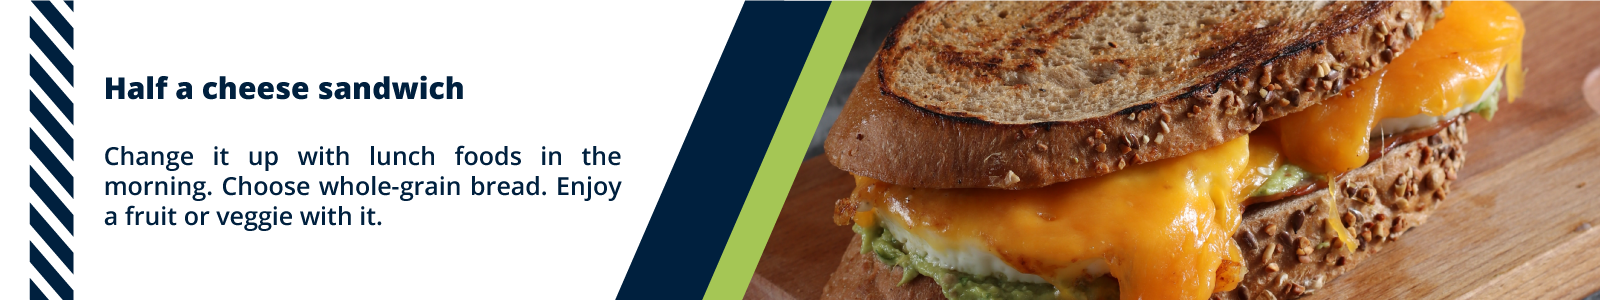 Half a cheese sandwich  Change it up with lunch foods in the morning. Choose whole-grain bread. Enjoy a fruit or veggie with it.